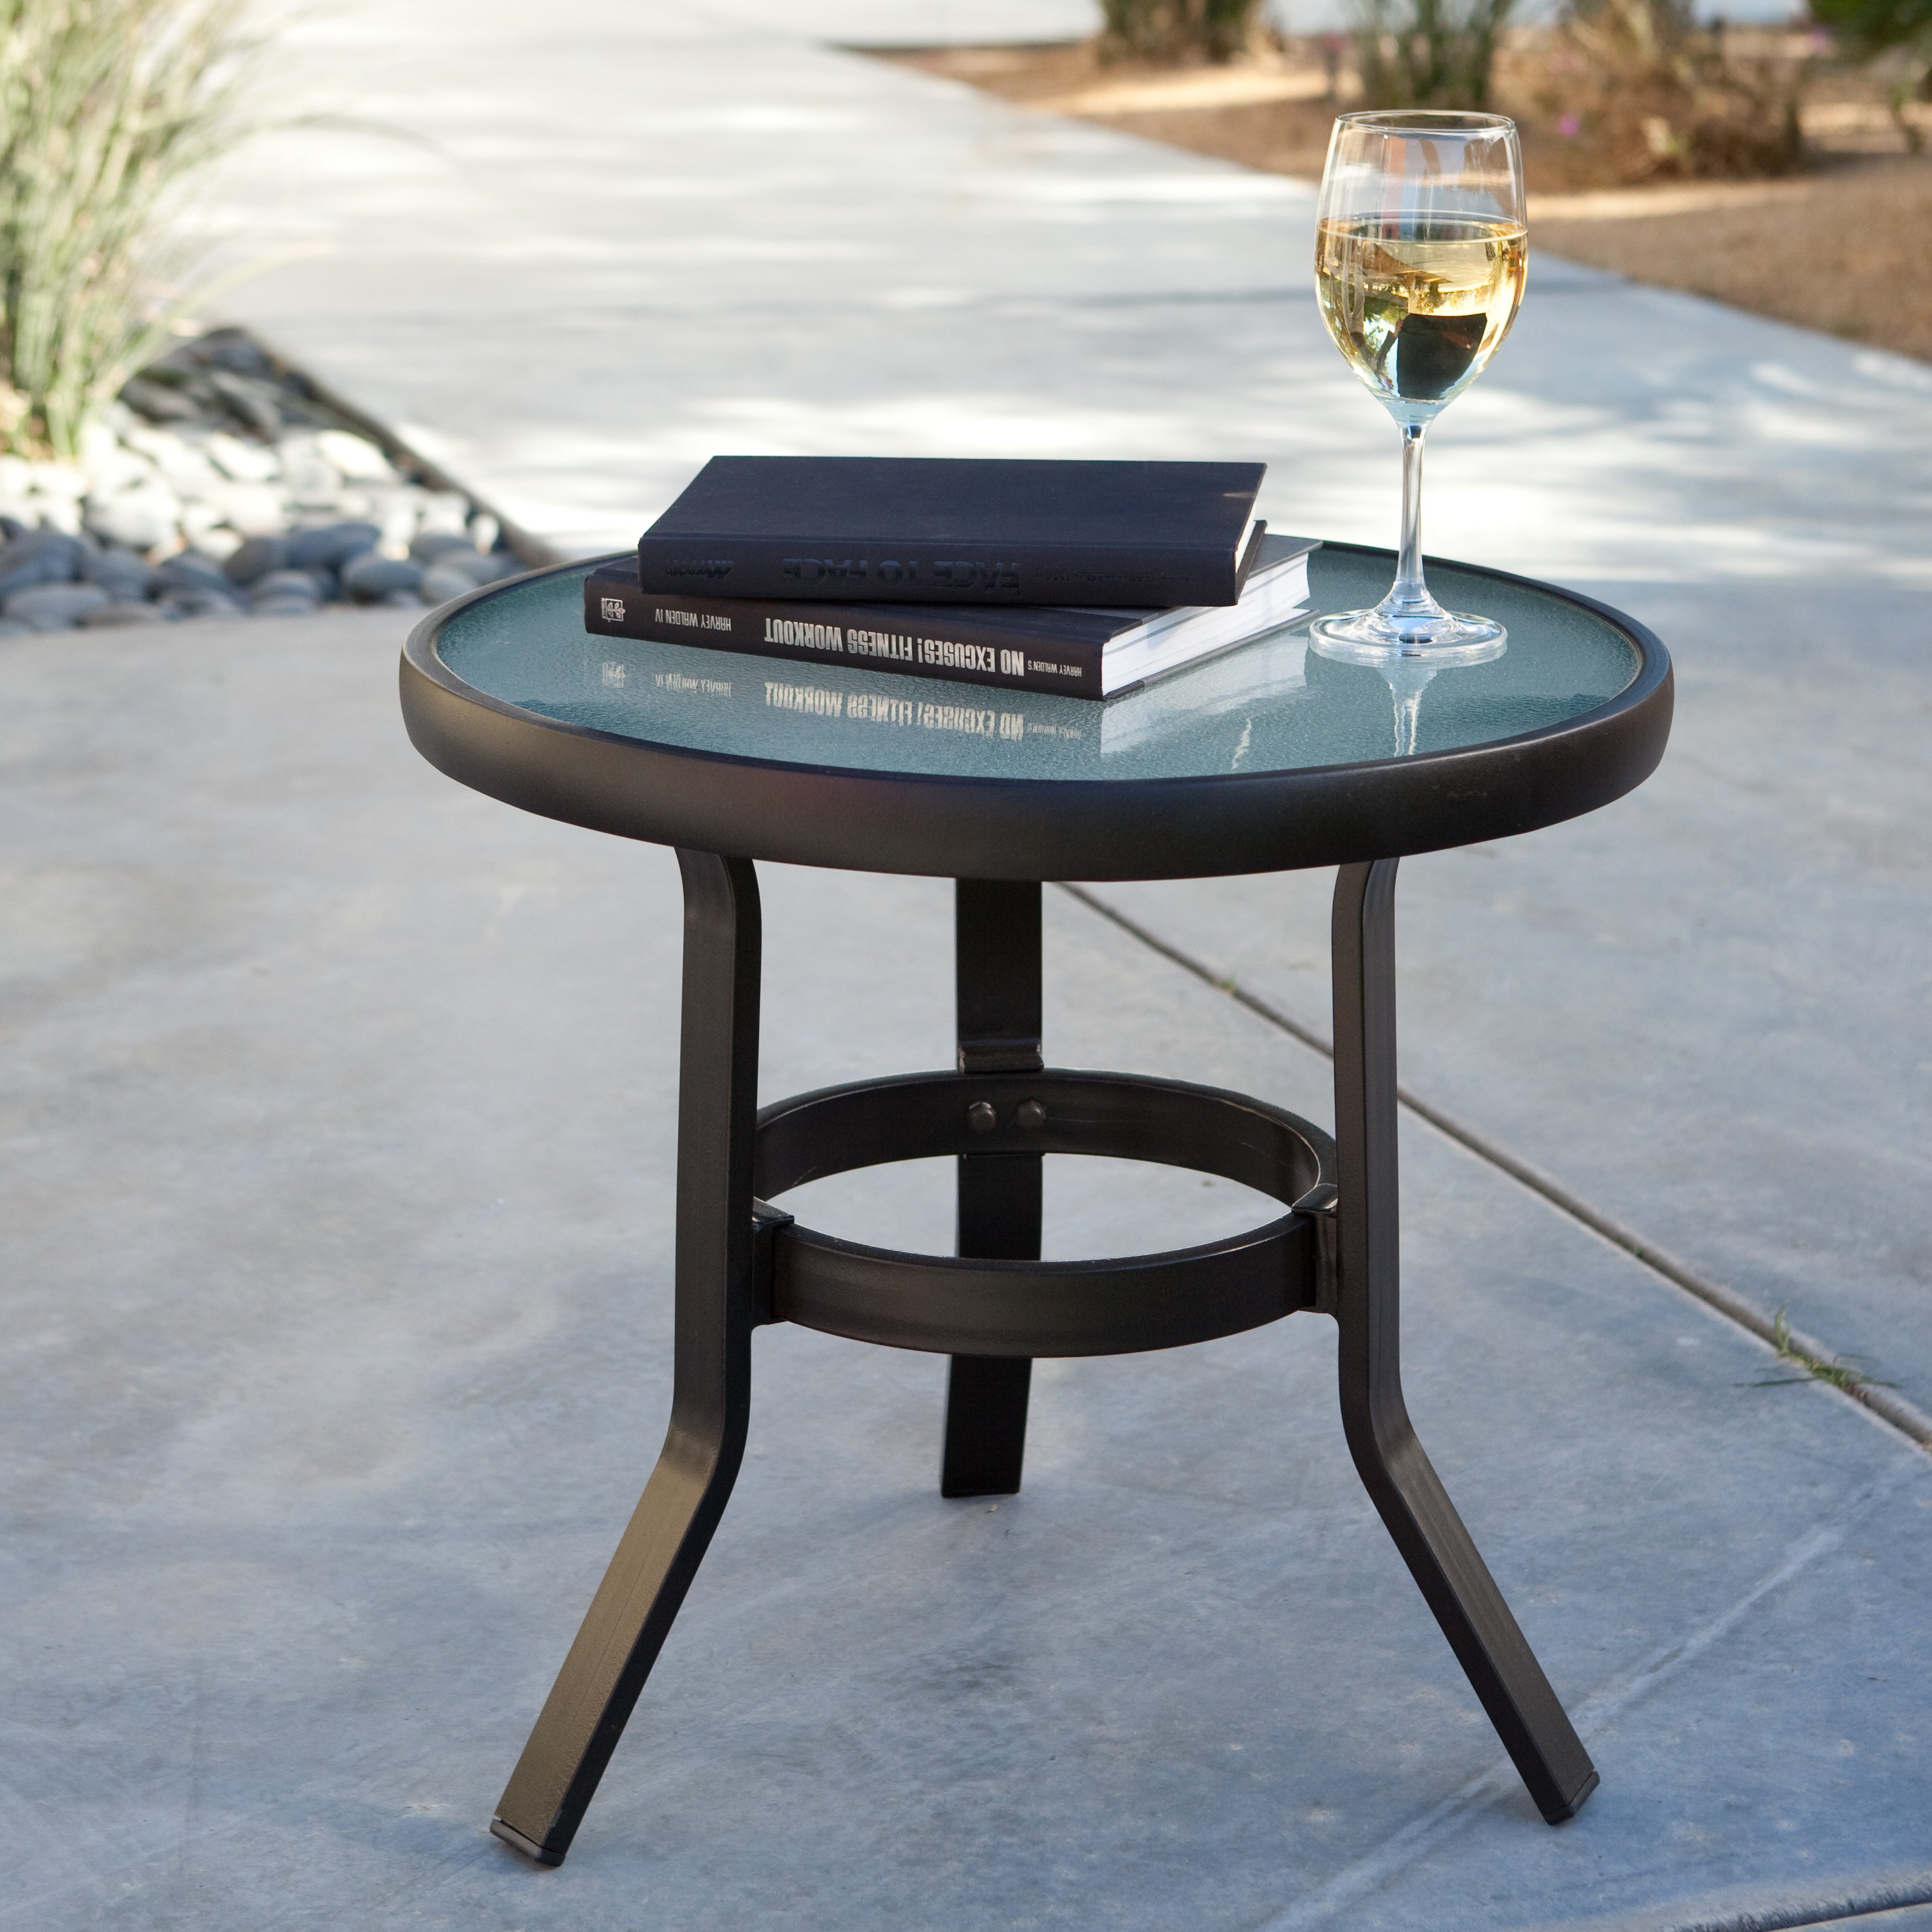 coral coast patio side table accent tables unfinished outdoor target ethan allen drop leaf end round covers natural living furniture west elm bistro hand painted kitchens coffee